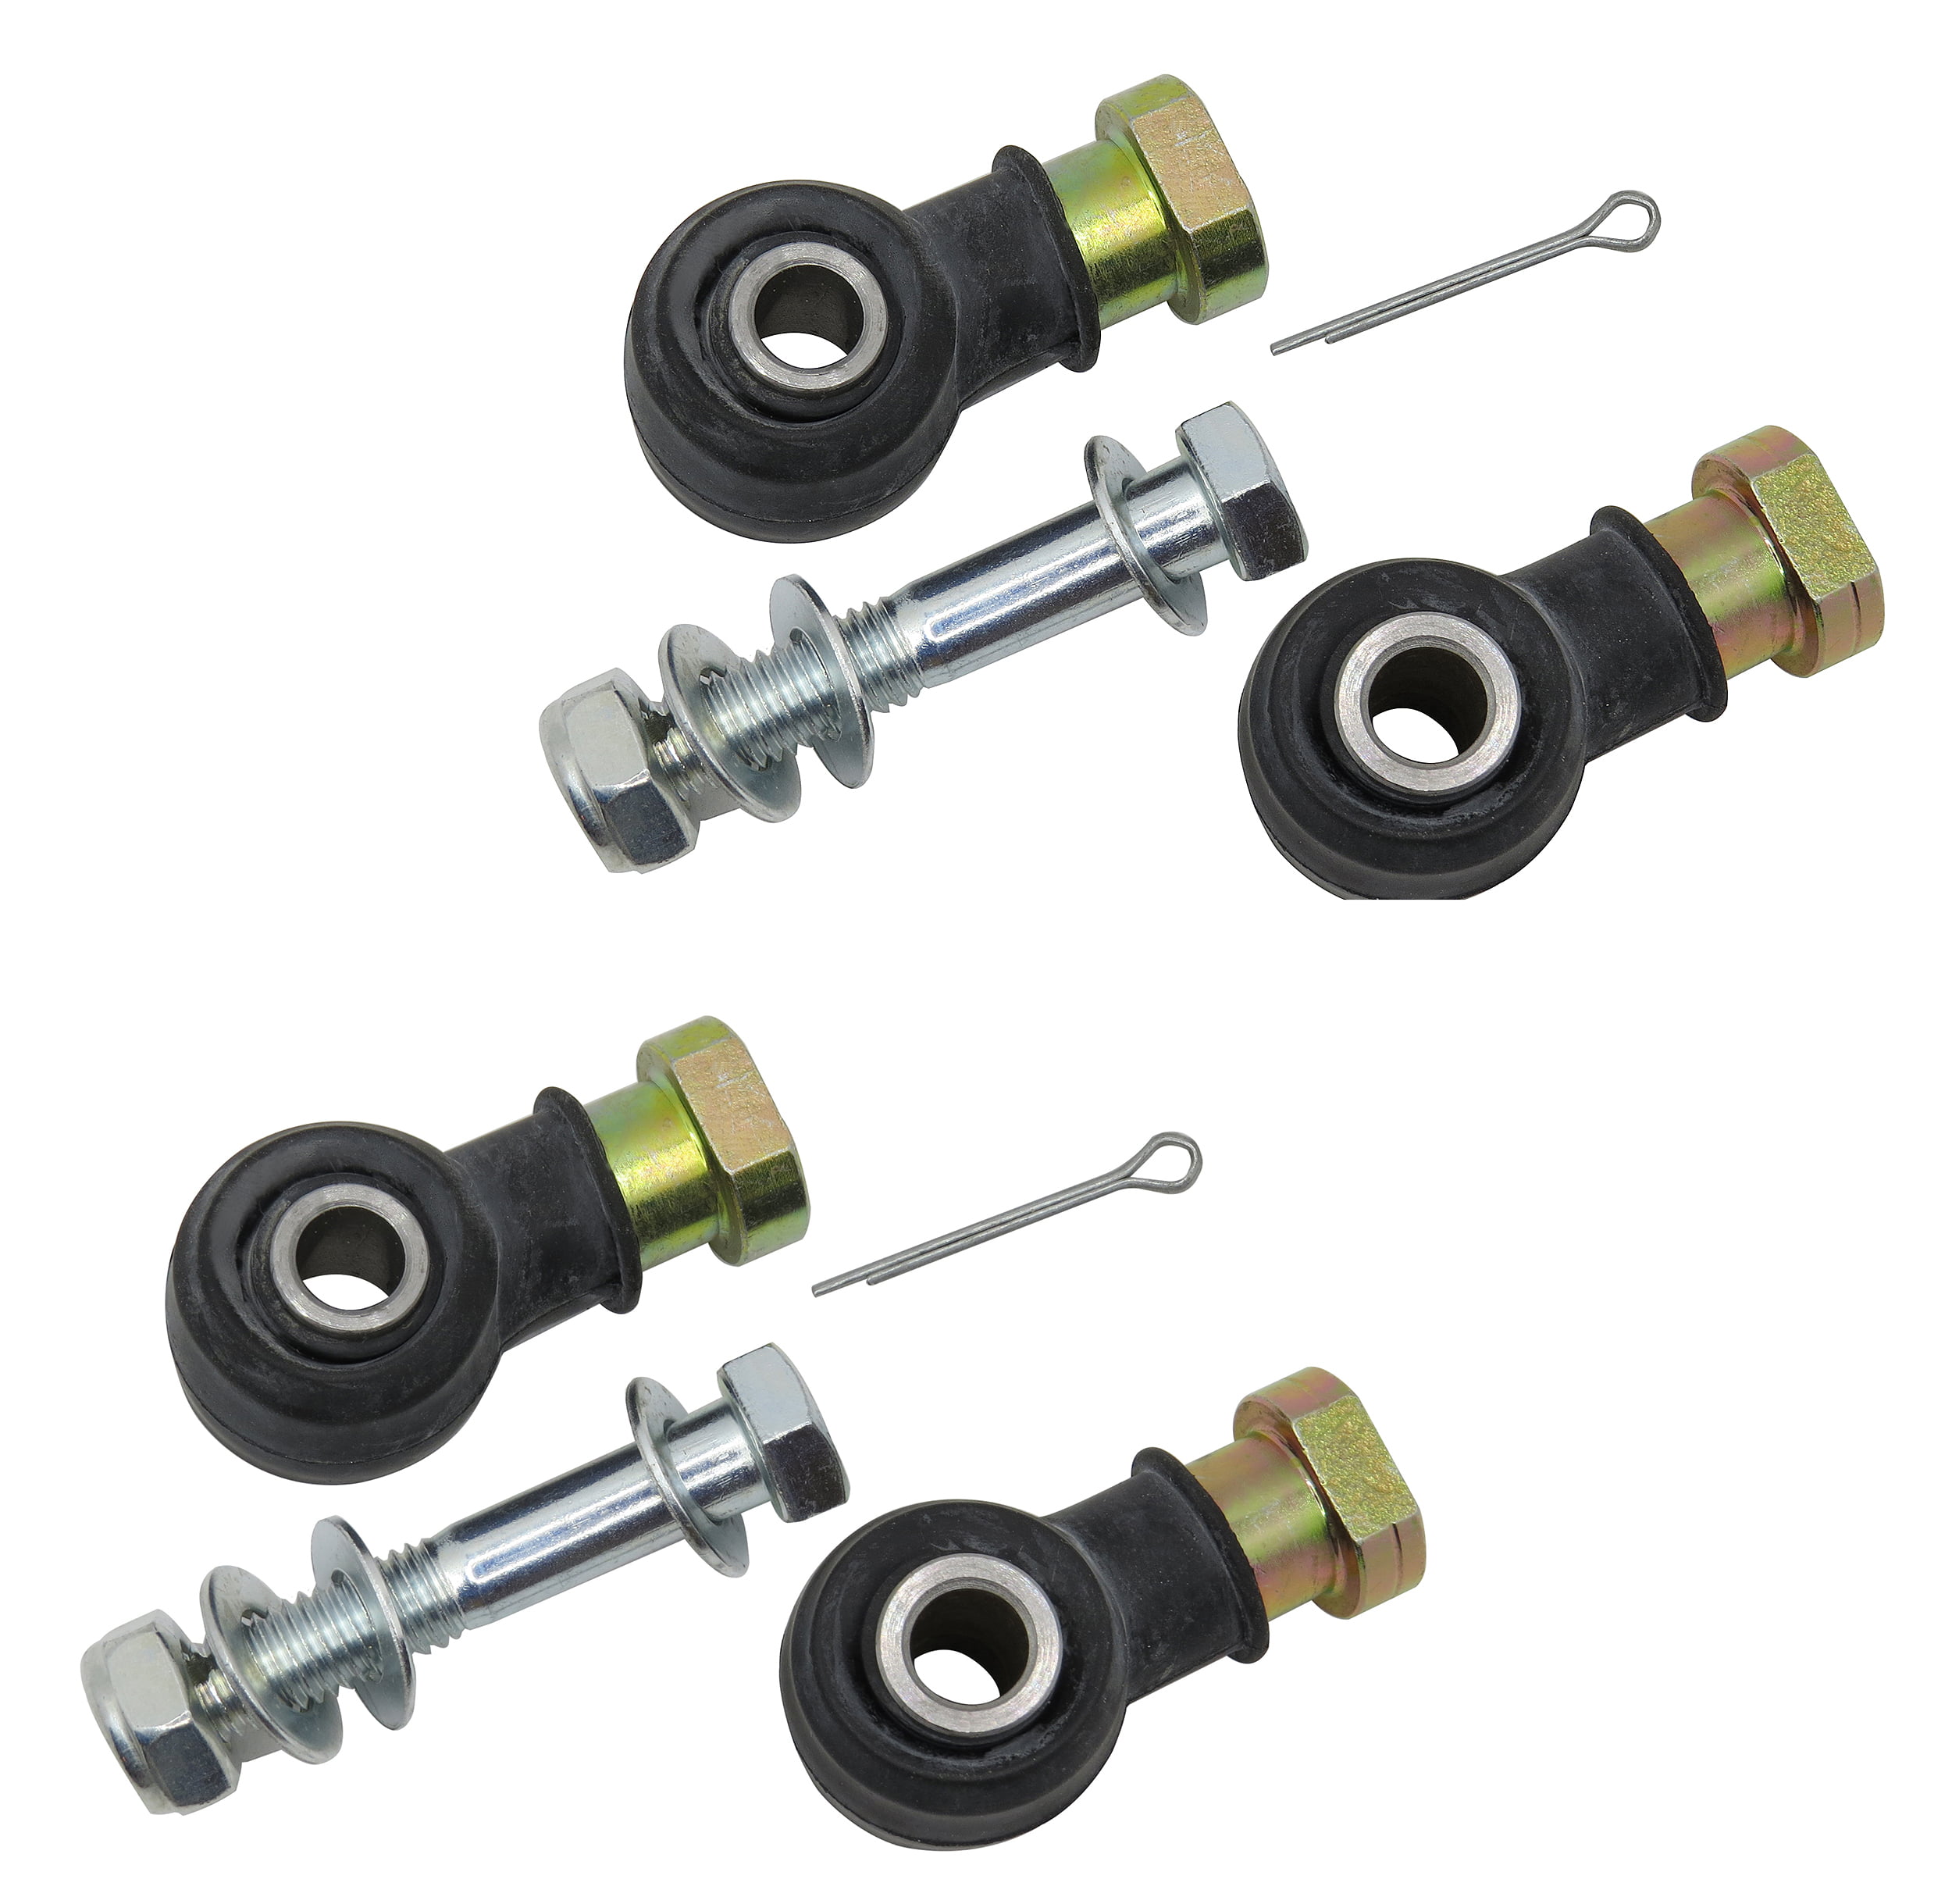 Aitook Two Sets Of Tie Rod End Kit for Polaris Trail Boss 325 330 2000-2012